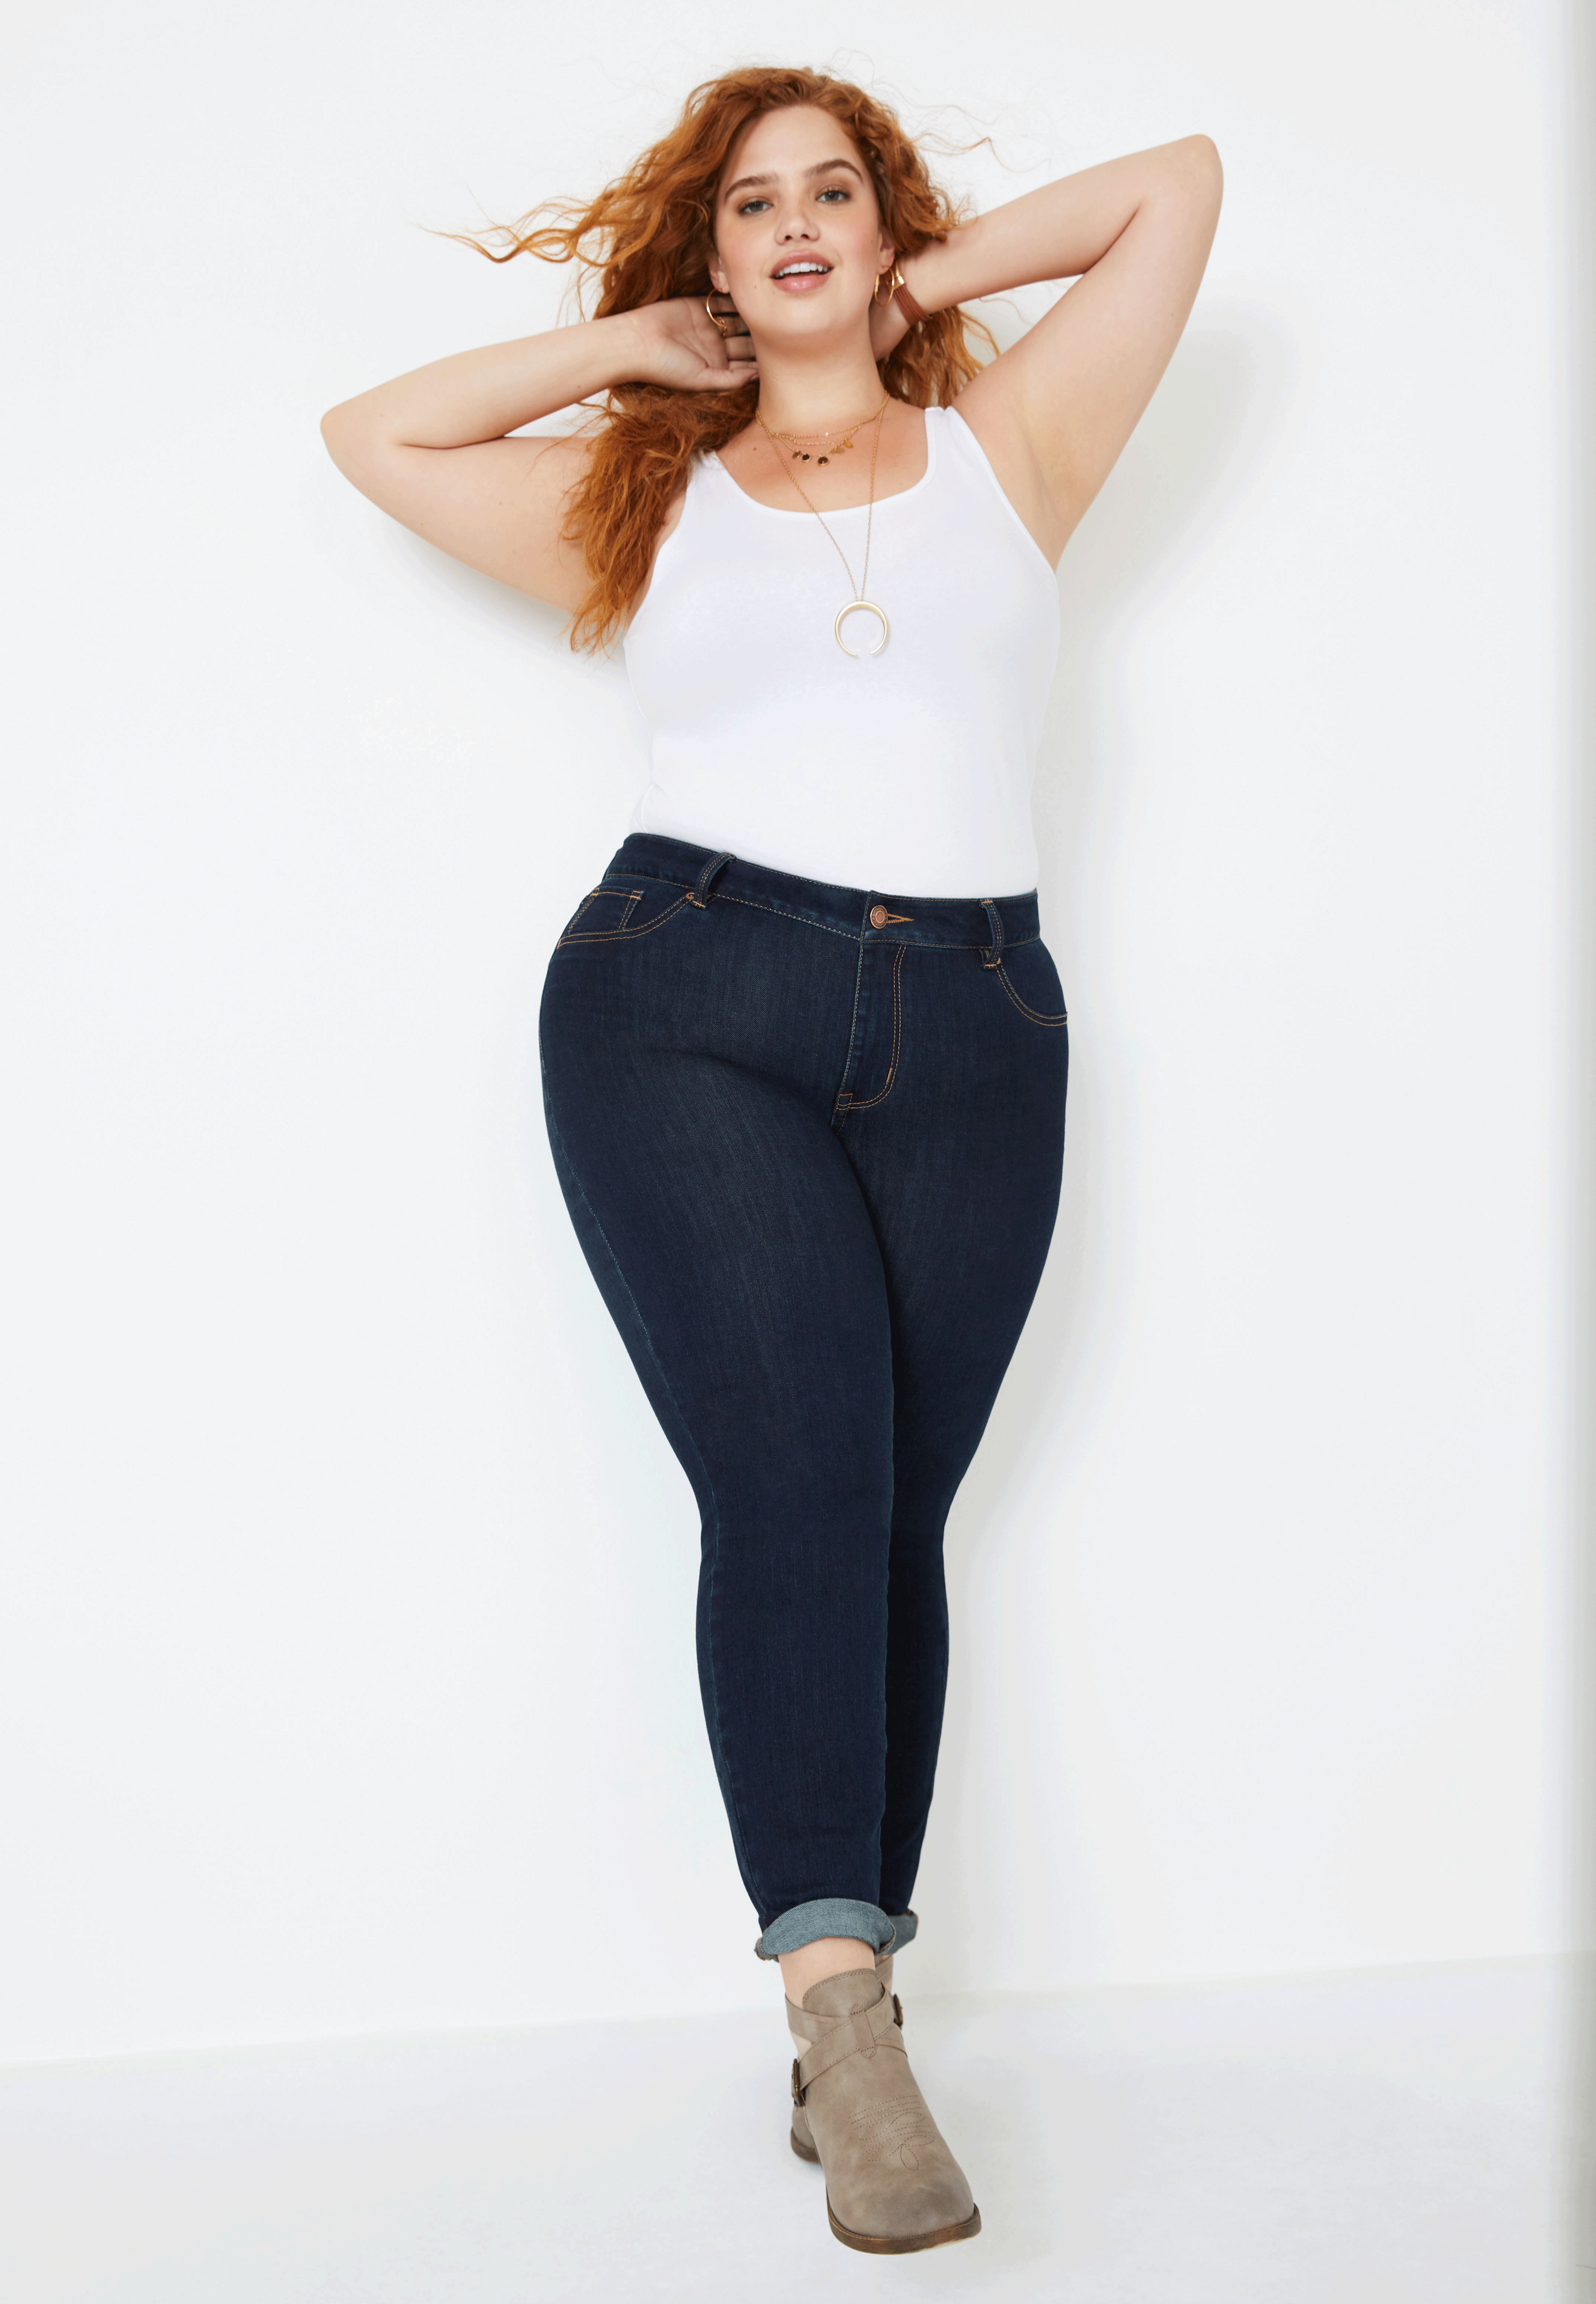 jeggings for plus size ladies